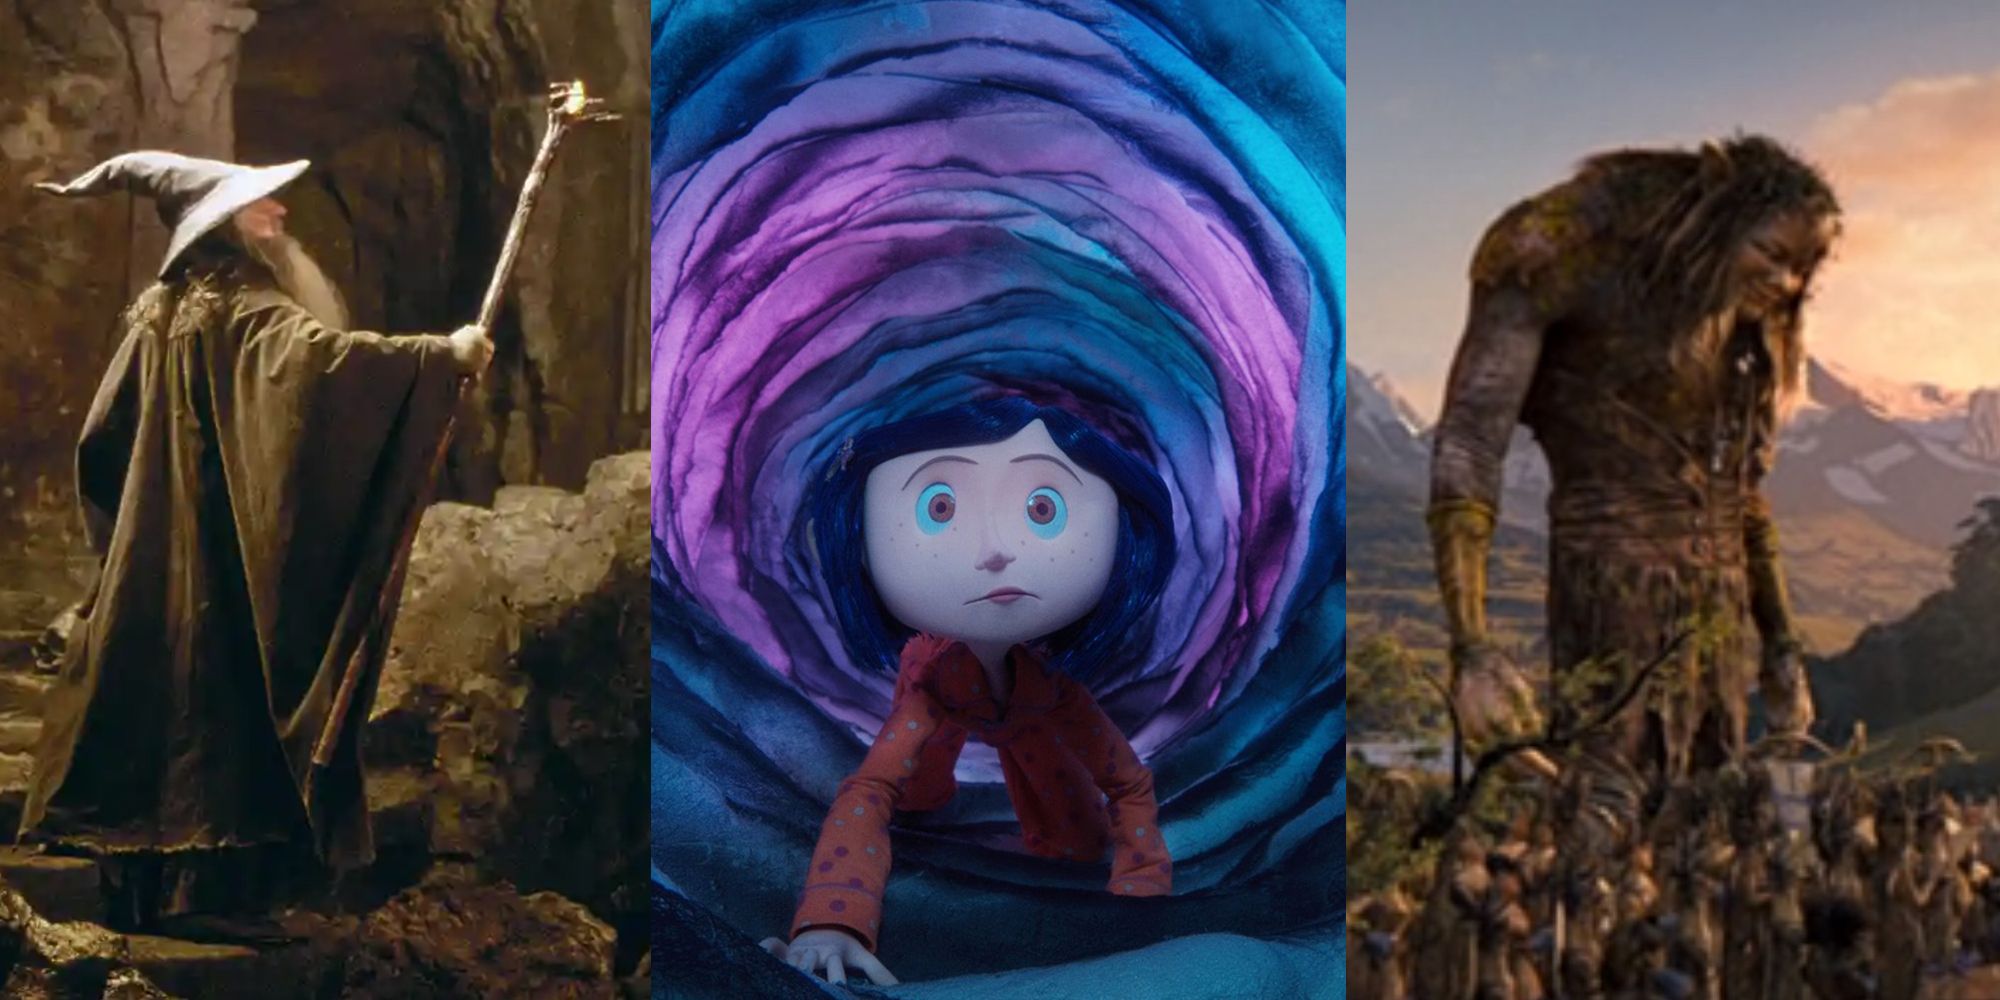 Split image of The Lord of the Rings, Coraline and Bridge to Terabithia